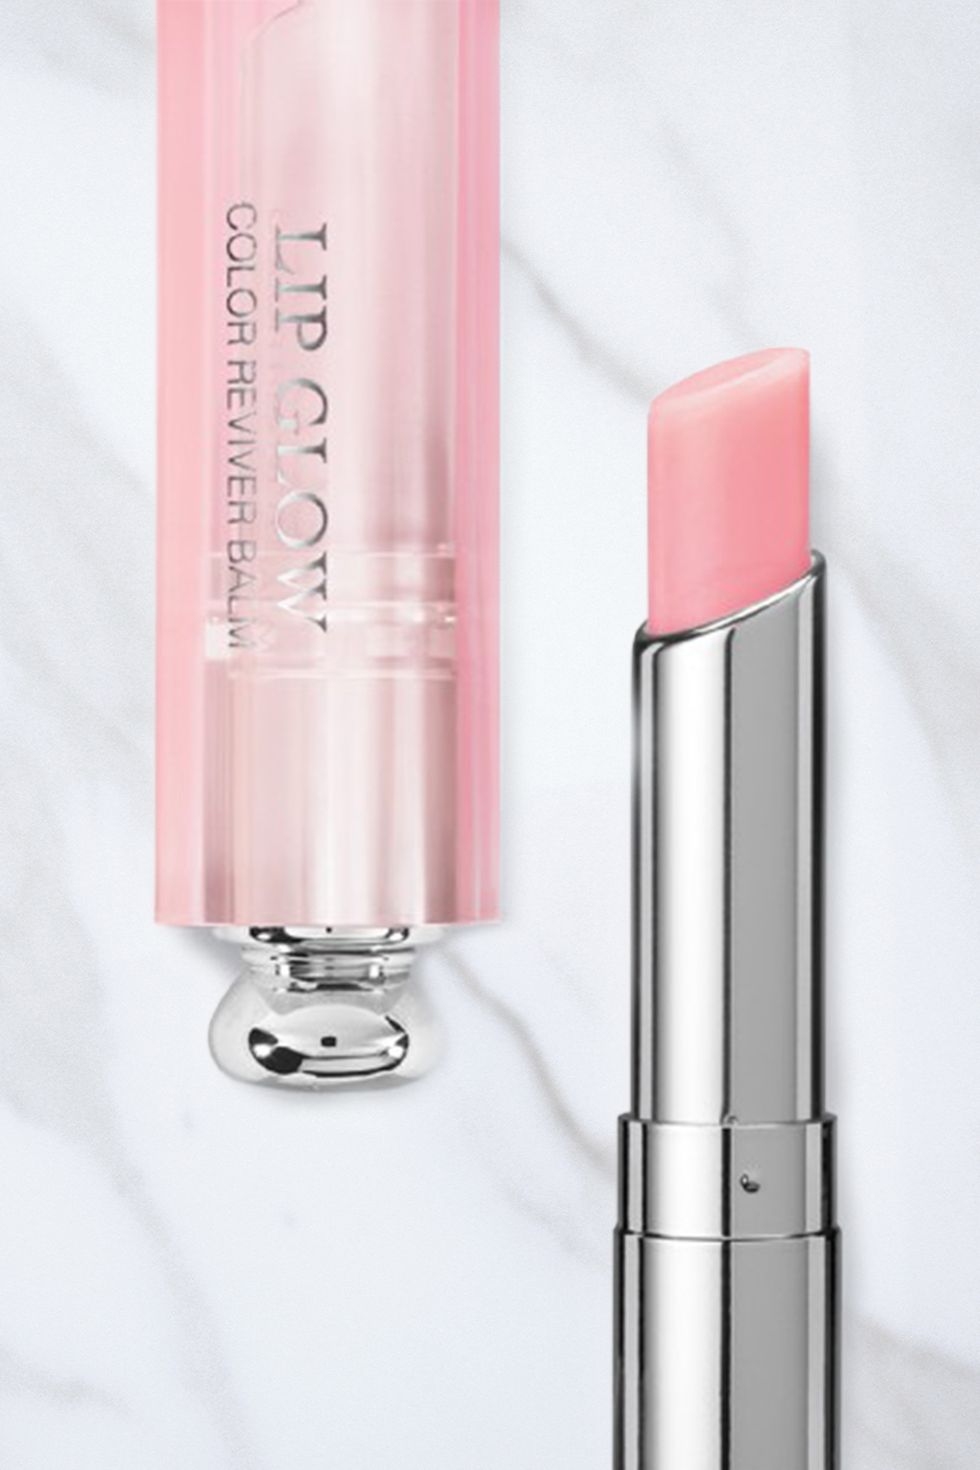 <p>For a casual night in, skip the full-on bold lipstick — that way you won't have to worry about touch-ups or getting your lip color all over him. Opt for something moisturizing that gives your lips a low-key hit of color like <a href="http://www.sephora.com/dior-addict-lip-glow-P236816" target="_blank">Dior Addict Lip Glow Awakening Balm</a>, $33. </p>